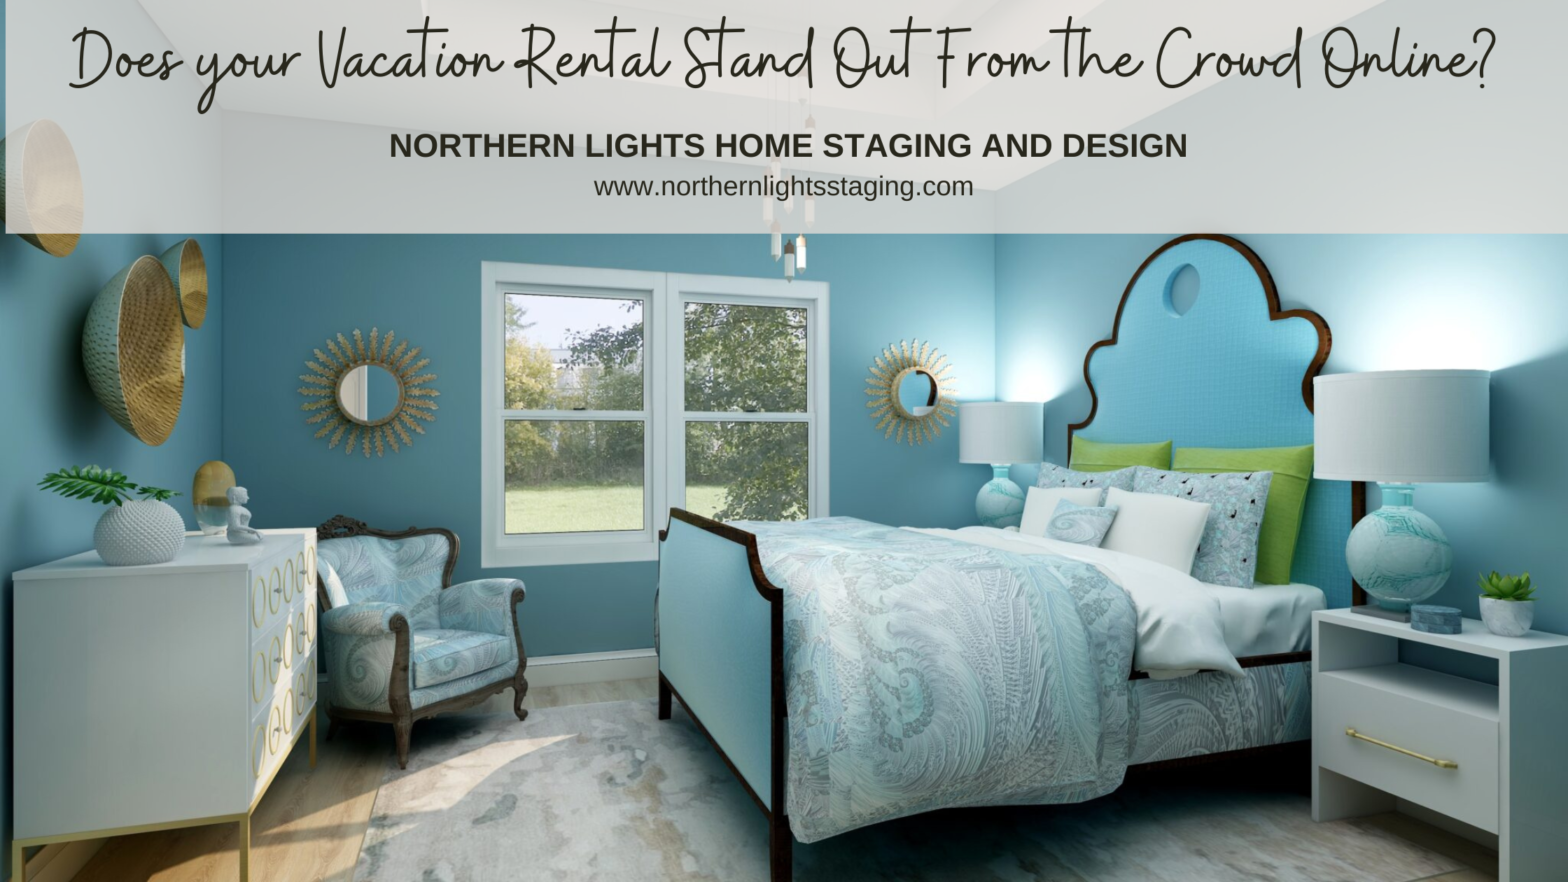 Does your Vacation Rental stand our from the crowd? Five tips to help your vacation rental stand out online and increase your income and bookings while attracting your ideal customers with home staging. #homestaging #vacationrental #bedandbreakfastdesign #bedandbreakfastincom #B&B #marketing #branding #bedandbreakfastdecor